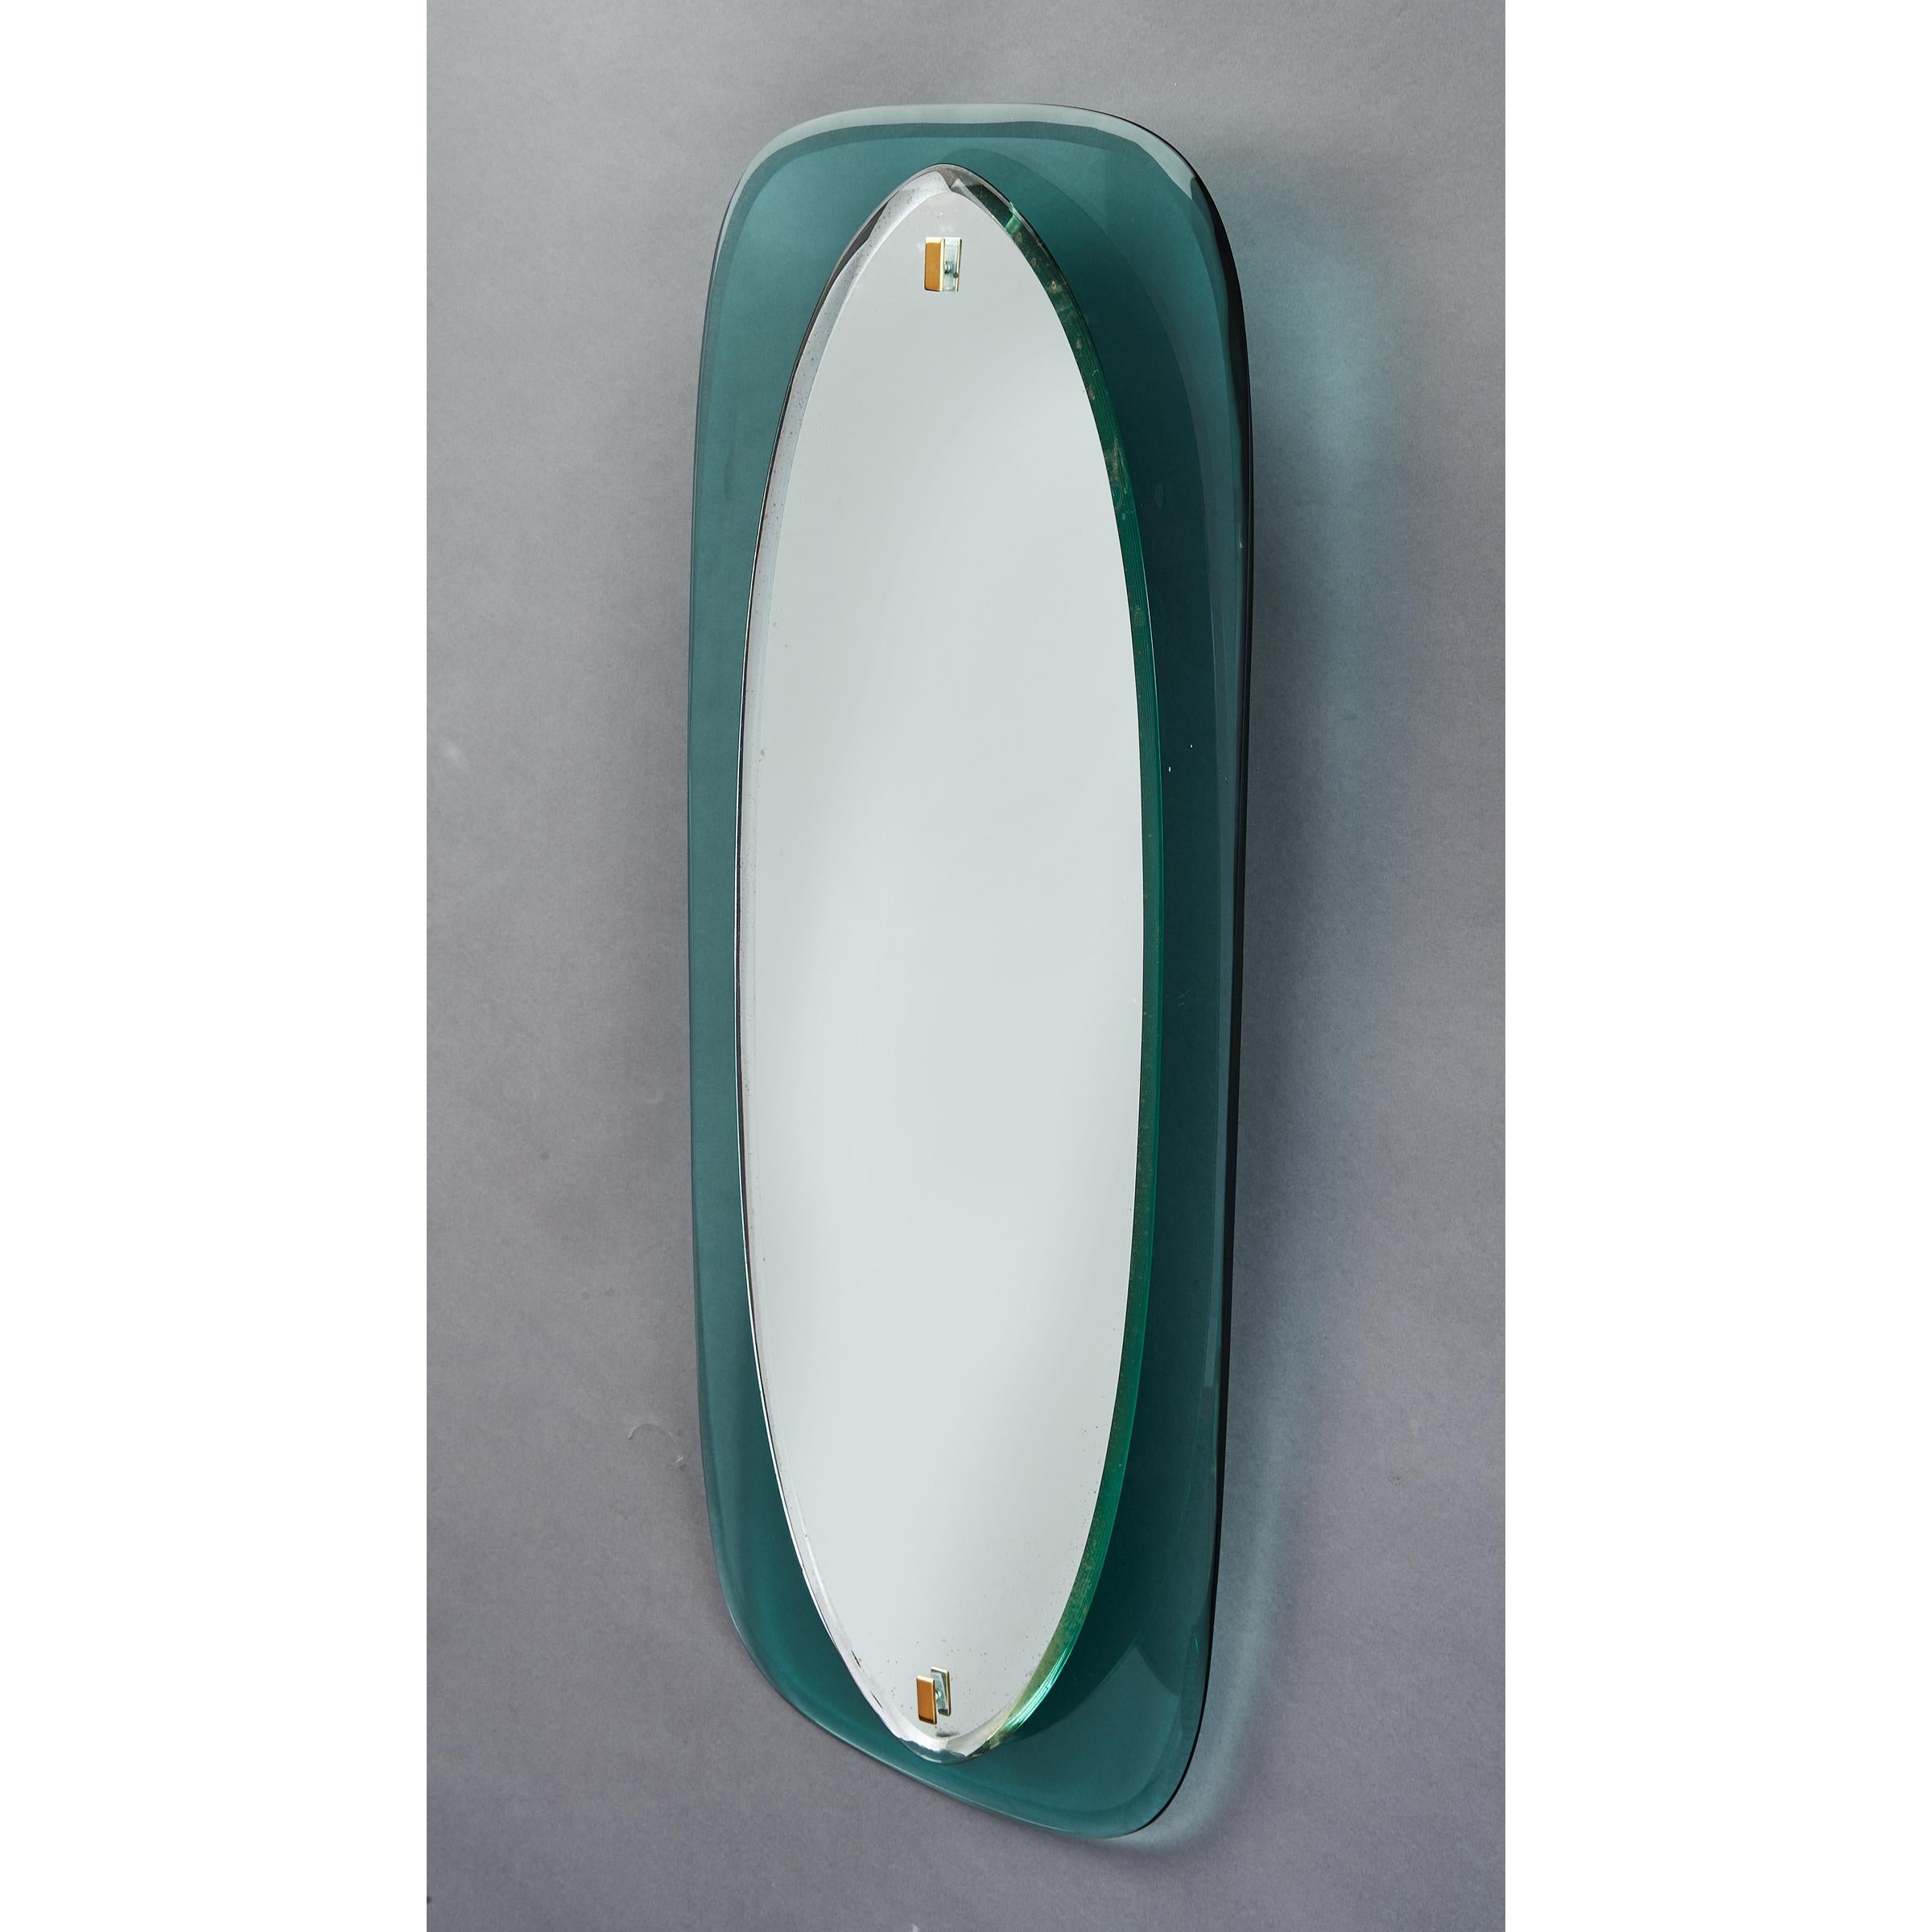 Italy 1960's
Elegantly narrow beveled oval mirror raised on a bowed colored glass frame, with brass mounts, in the manner of Fontana Arte
Measures: 34.5 H x 13.5 W x 2 D
We have another mirror of the same model in a different colored glass. See